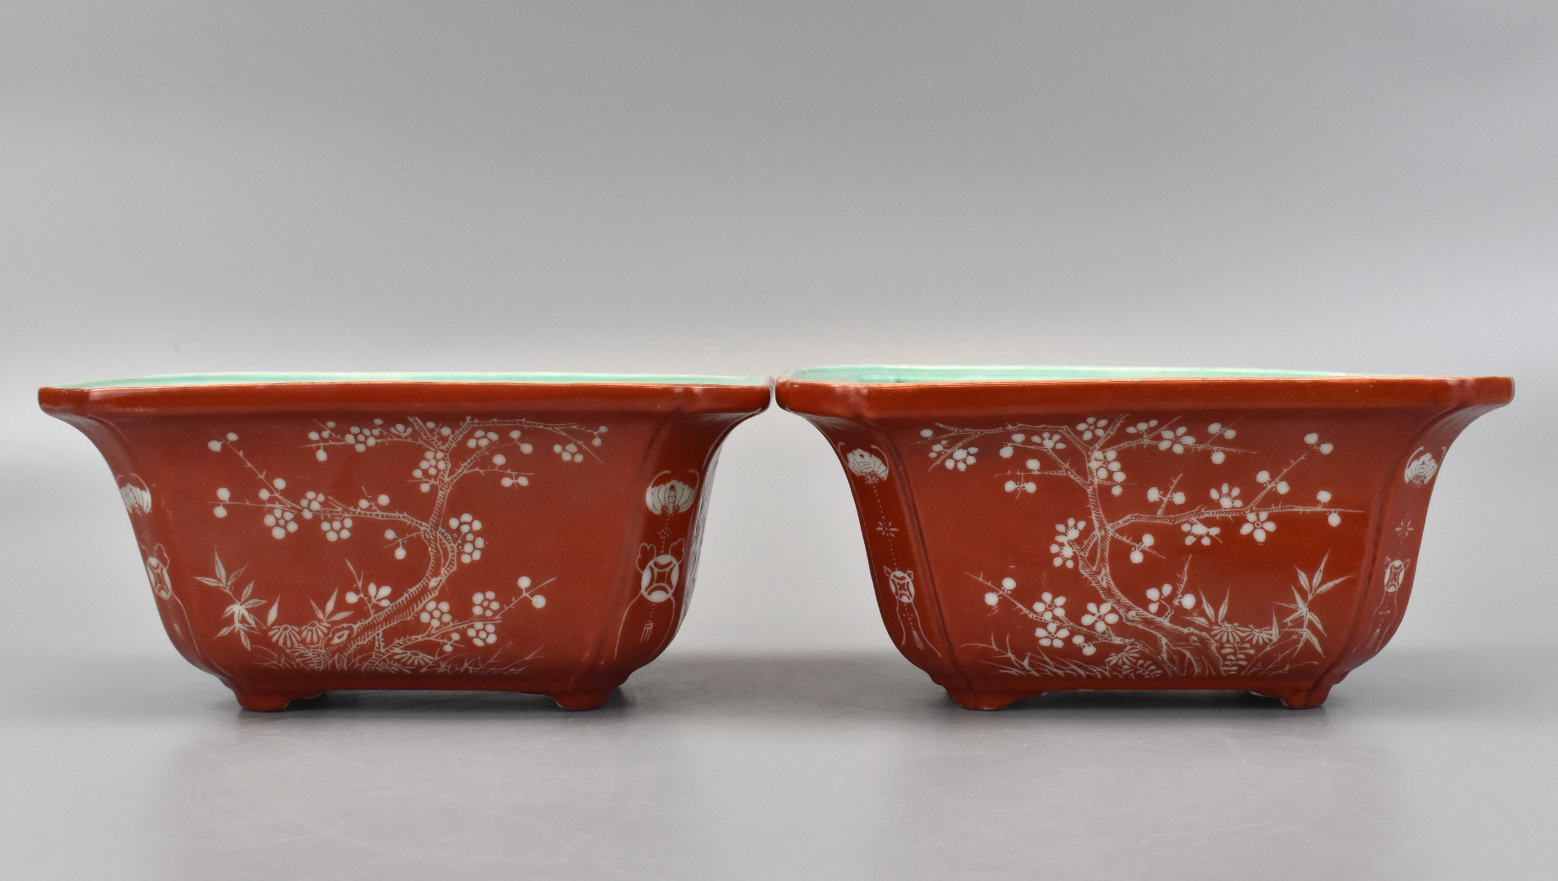 PAIR OF CHINESE CORAL RED PLANTER 339c39